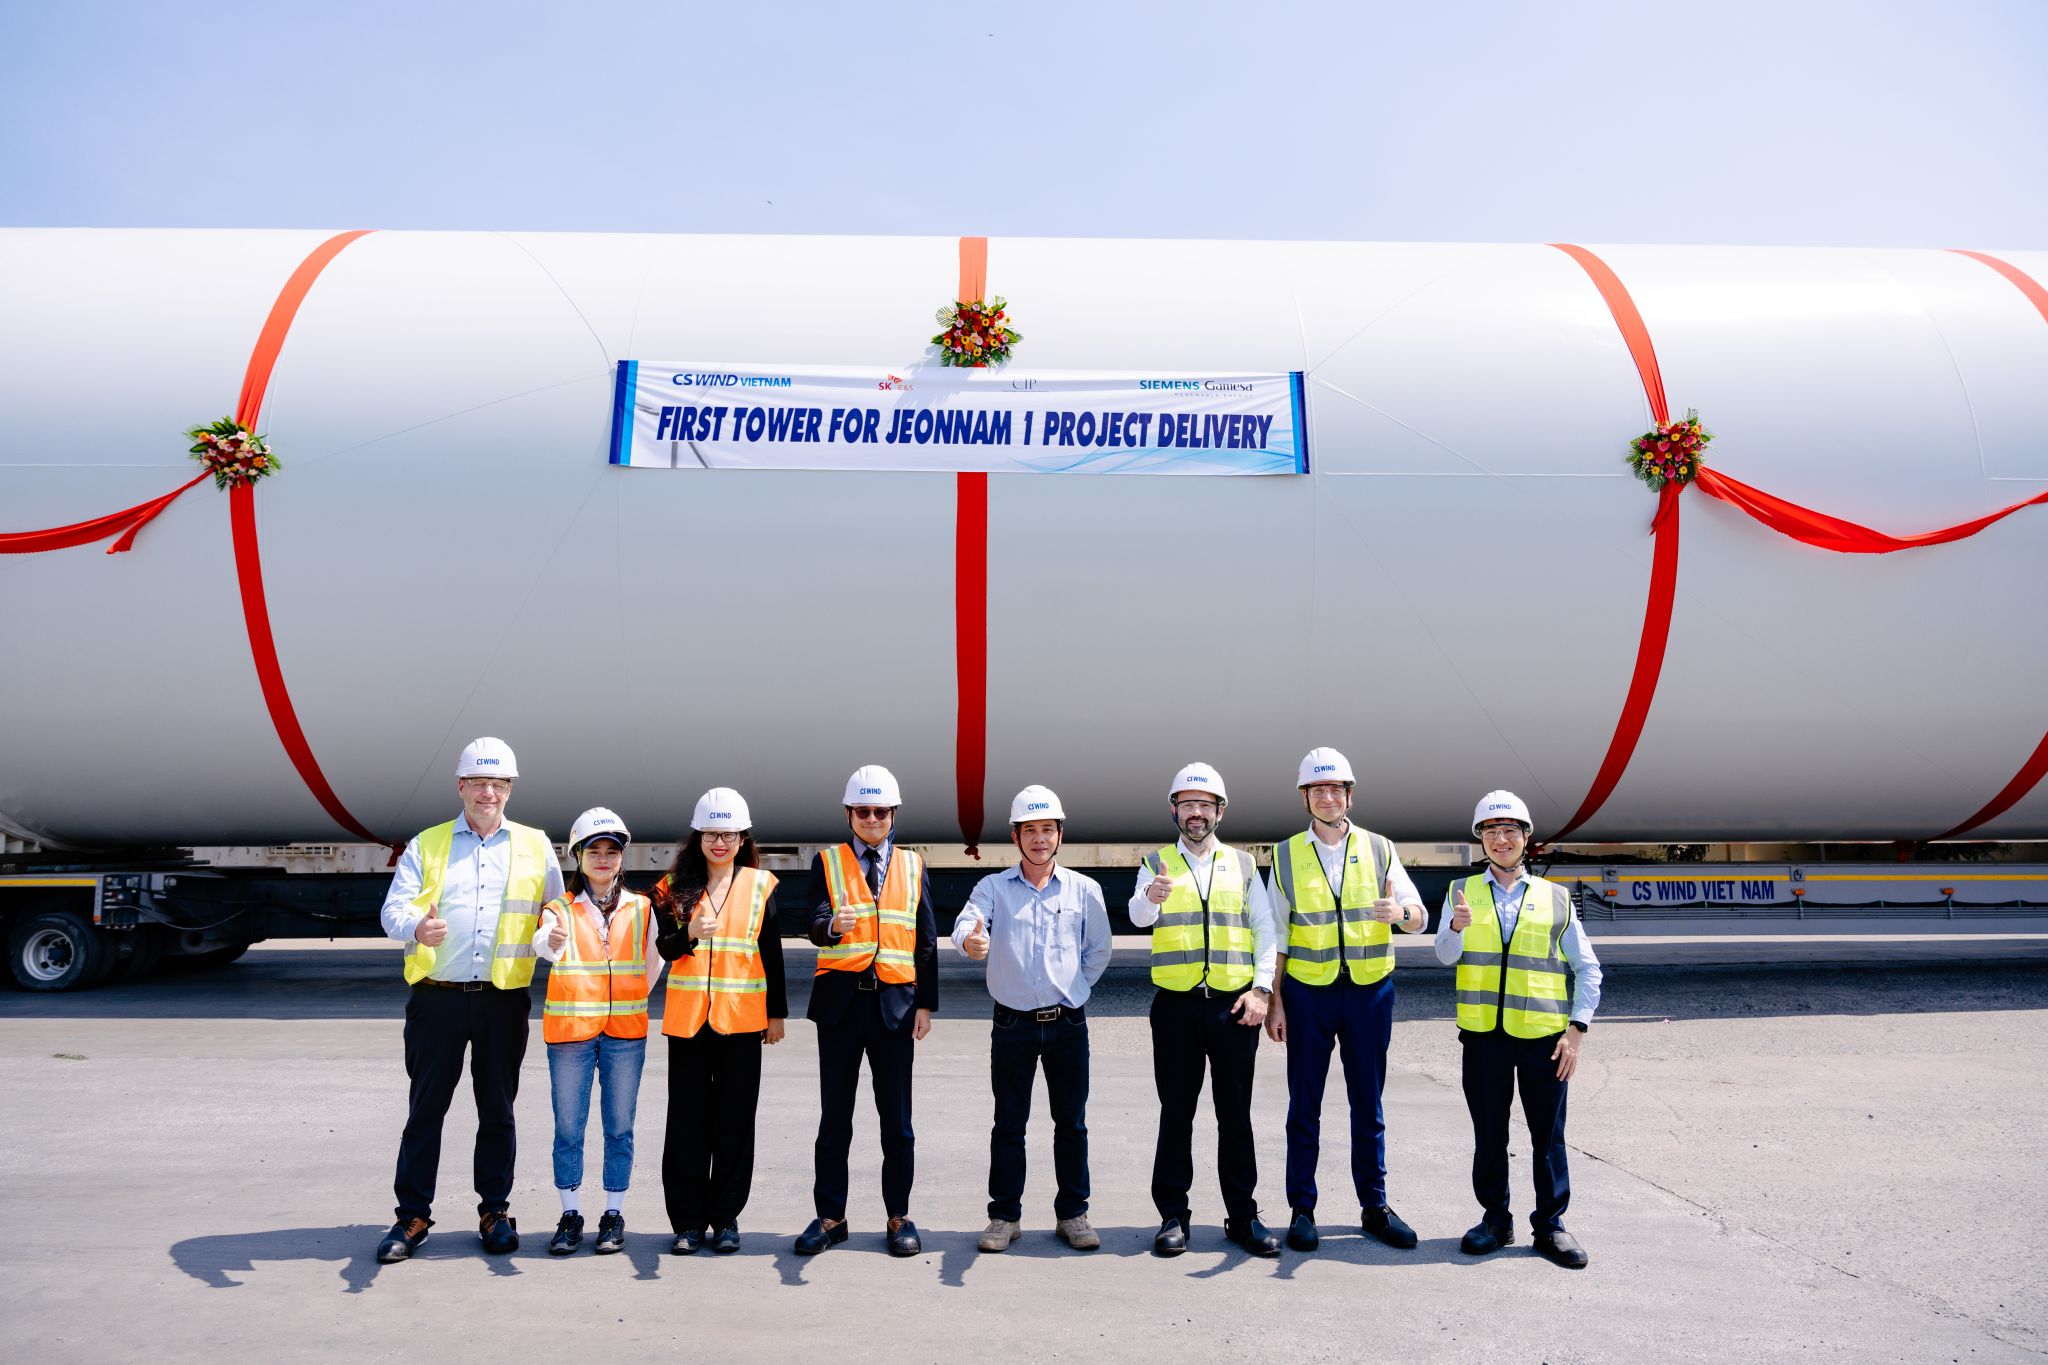 A photo of CS Wind's first tower for Jeonnam I offshore wind farm with CIP, COP and CS Wind team in front